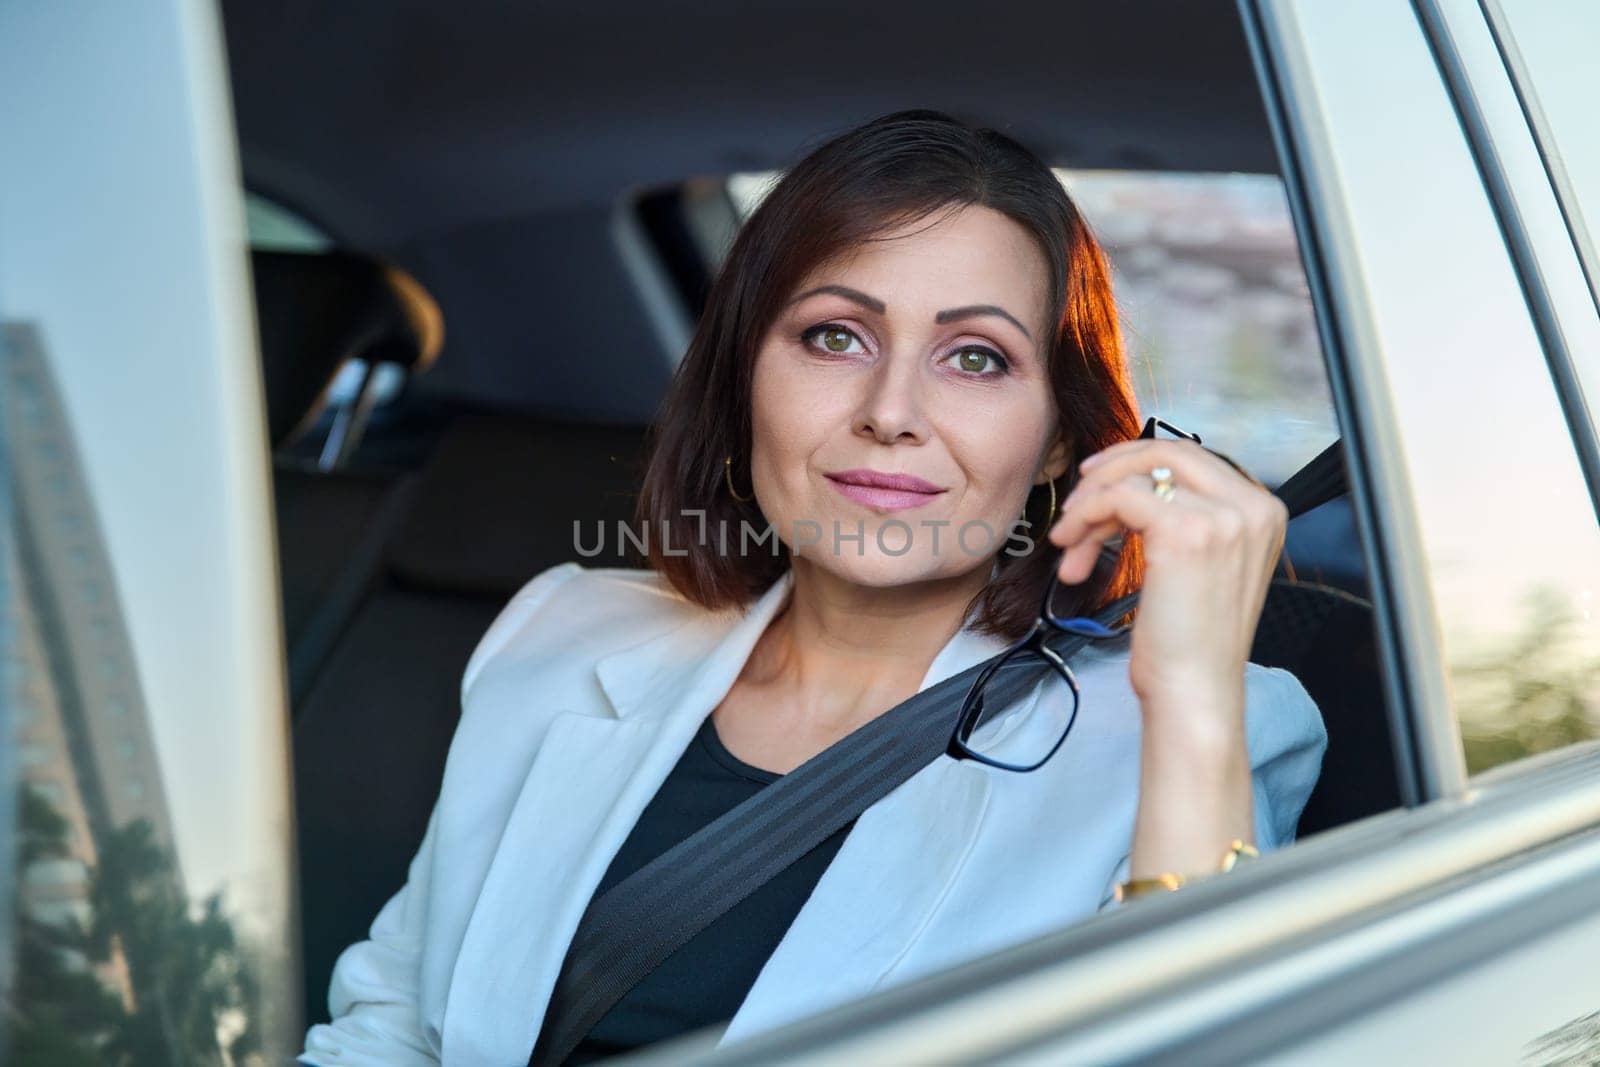 Portrait of business elegant middle-aged woman in car in back passenger seat. Beautiful confident smiling woman 45 years old looking at camera. Business, auto travel, lifestyle, people, mature age